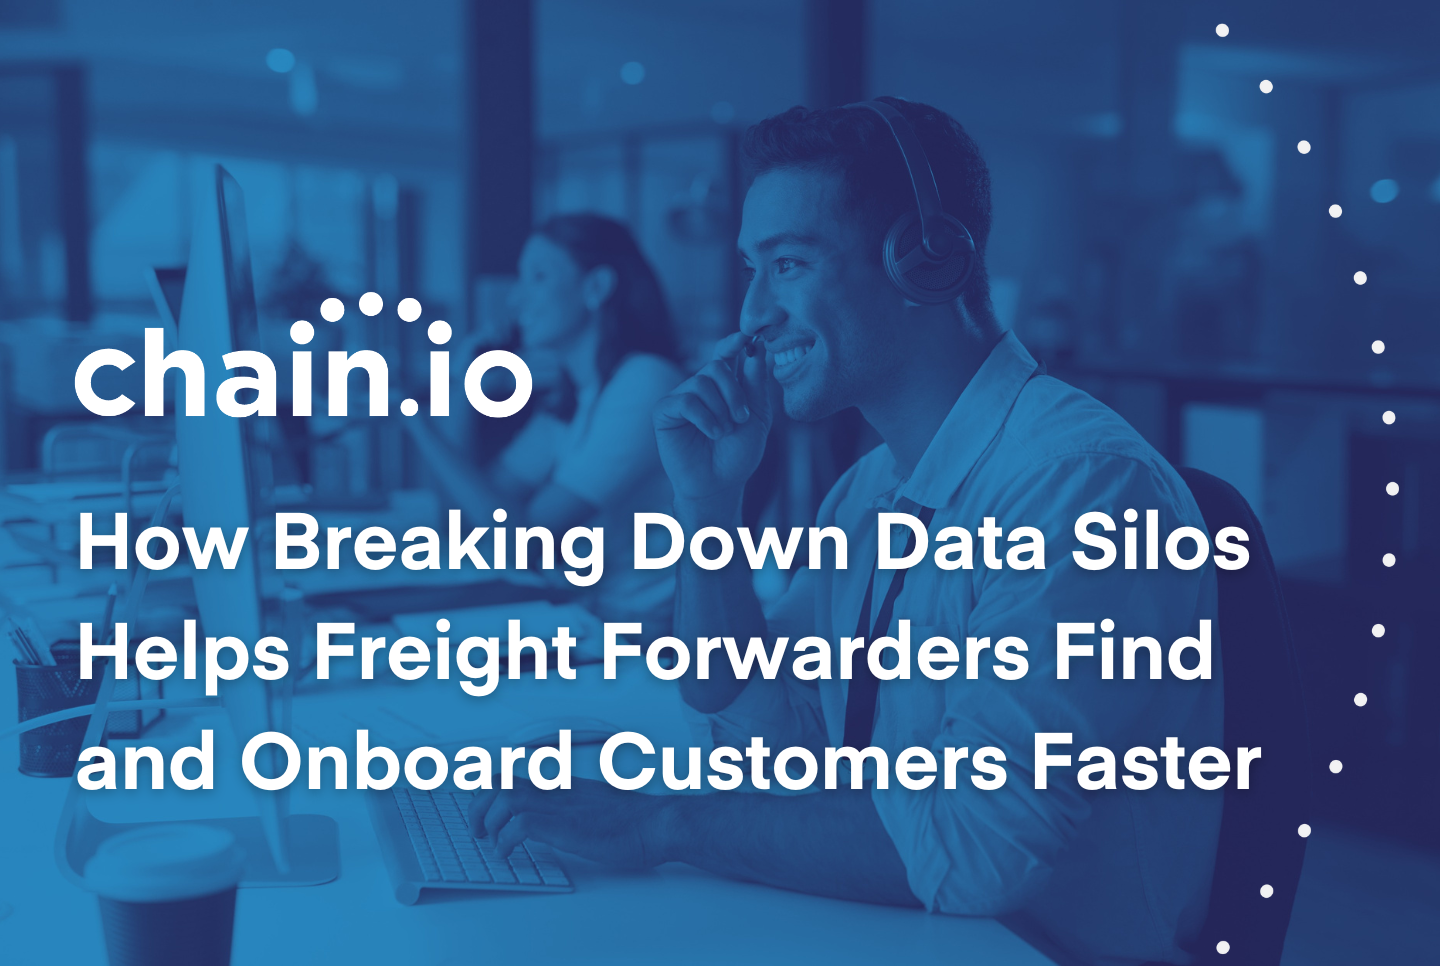 Supply chain professional smiling along with the text "How Breaking Down Data Silos Helps Freight Forwarders Find and Onboard Customers Faster"